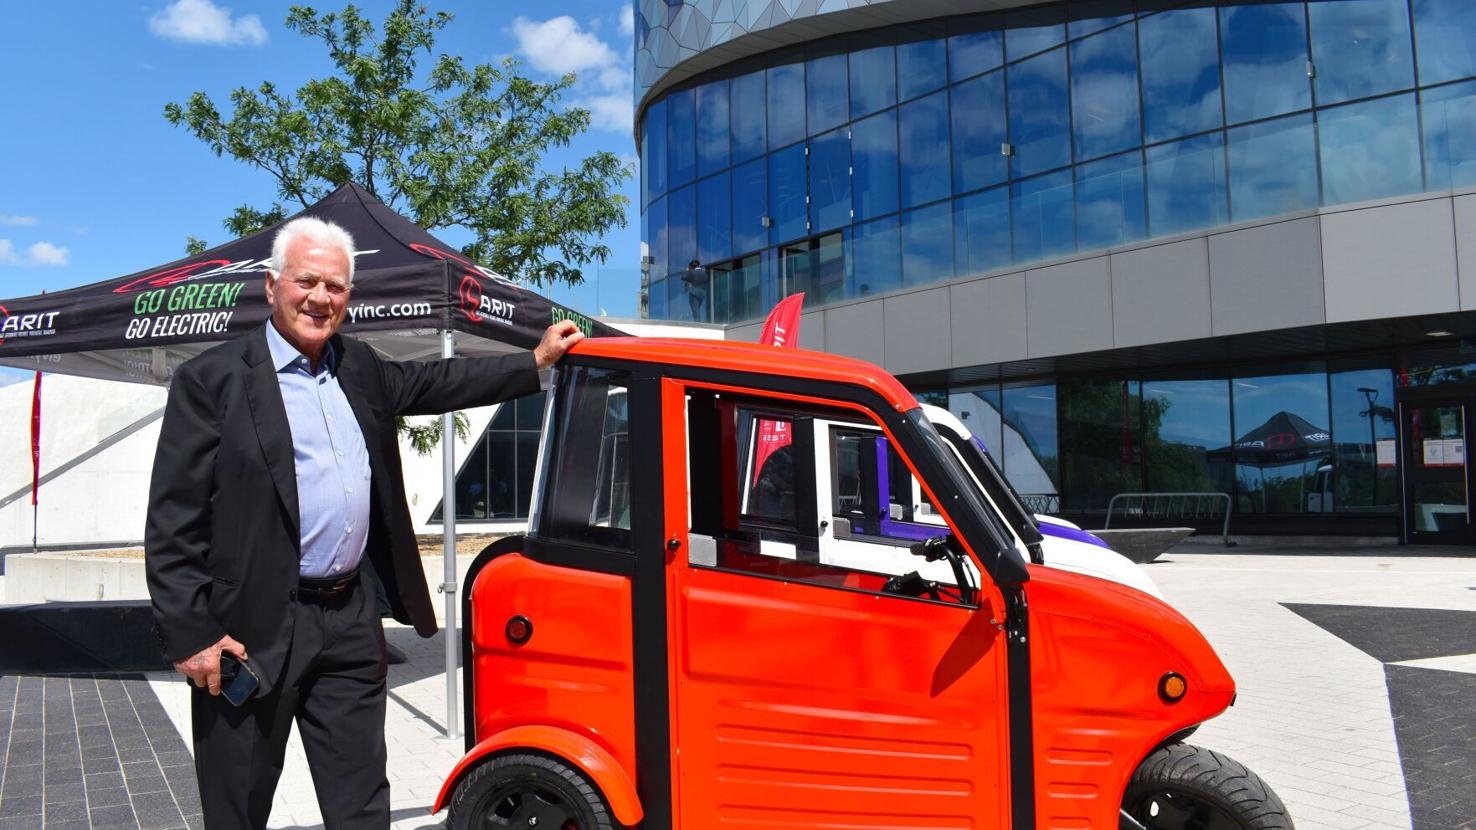 Frank Stronach partners with York University to help build SARIT electric car